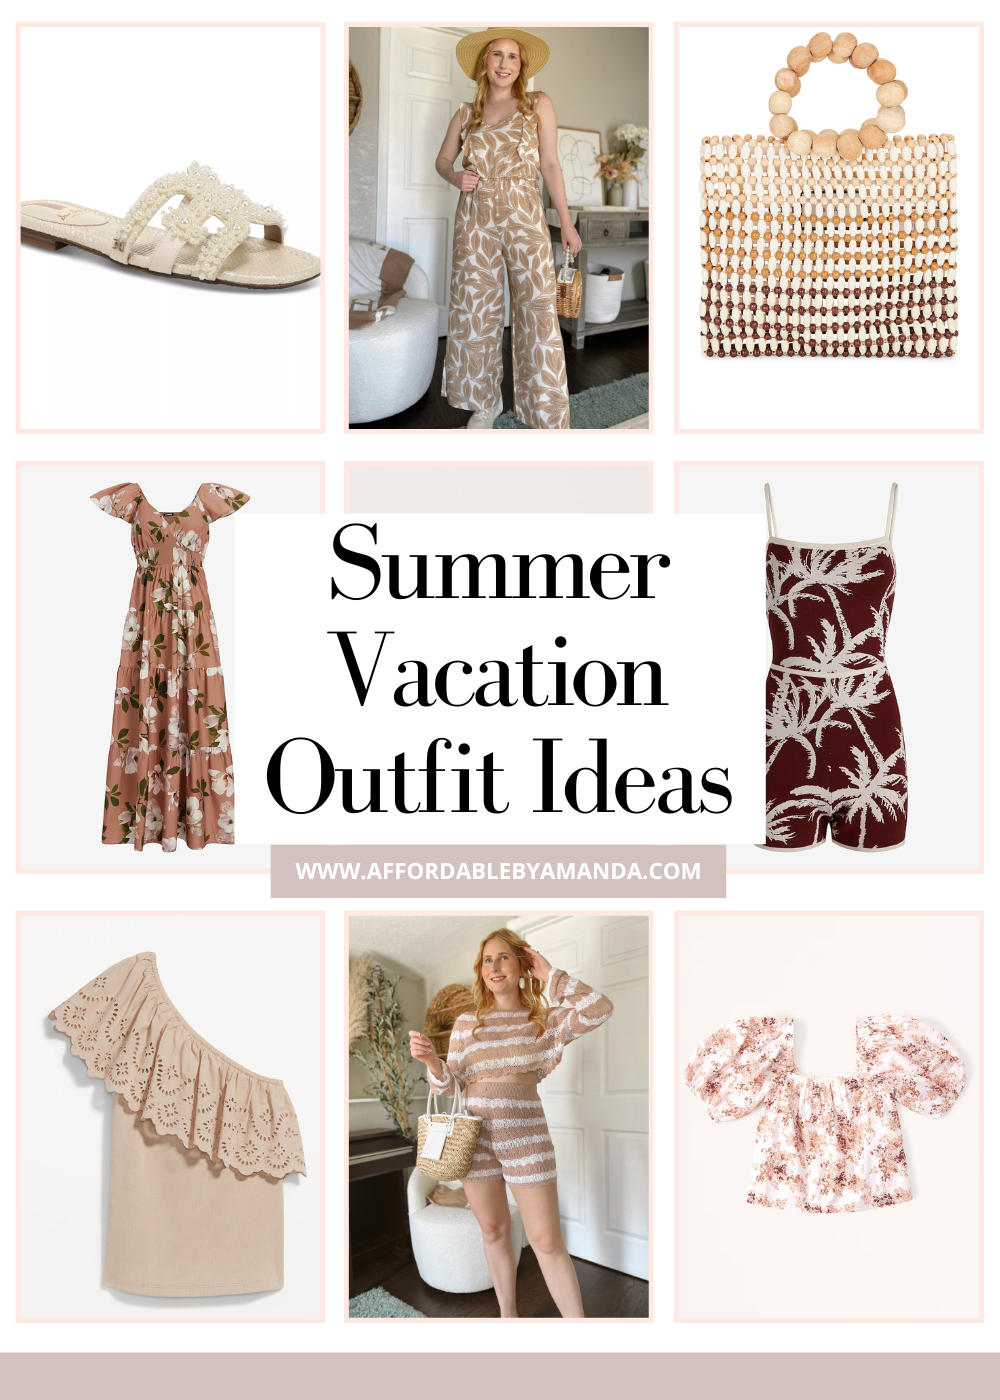 Summer Vacation Outfit Ideas 2023 - Affordable by Amanda